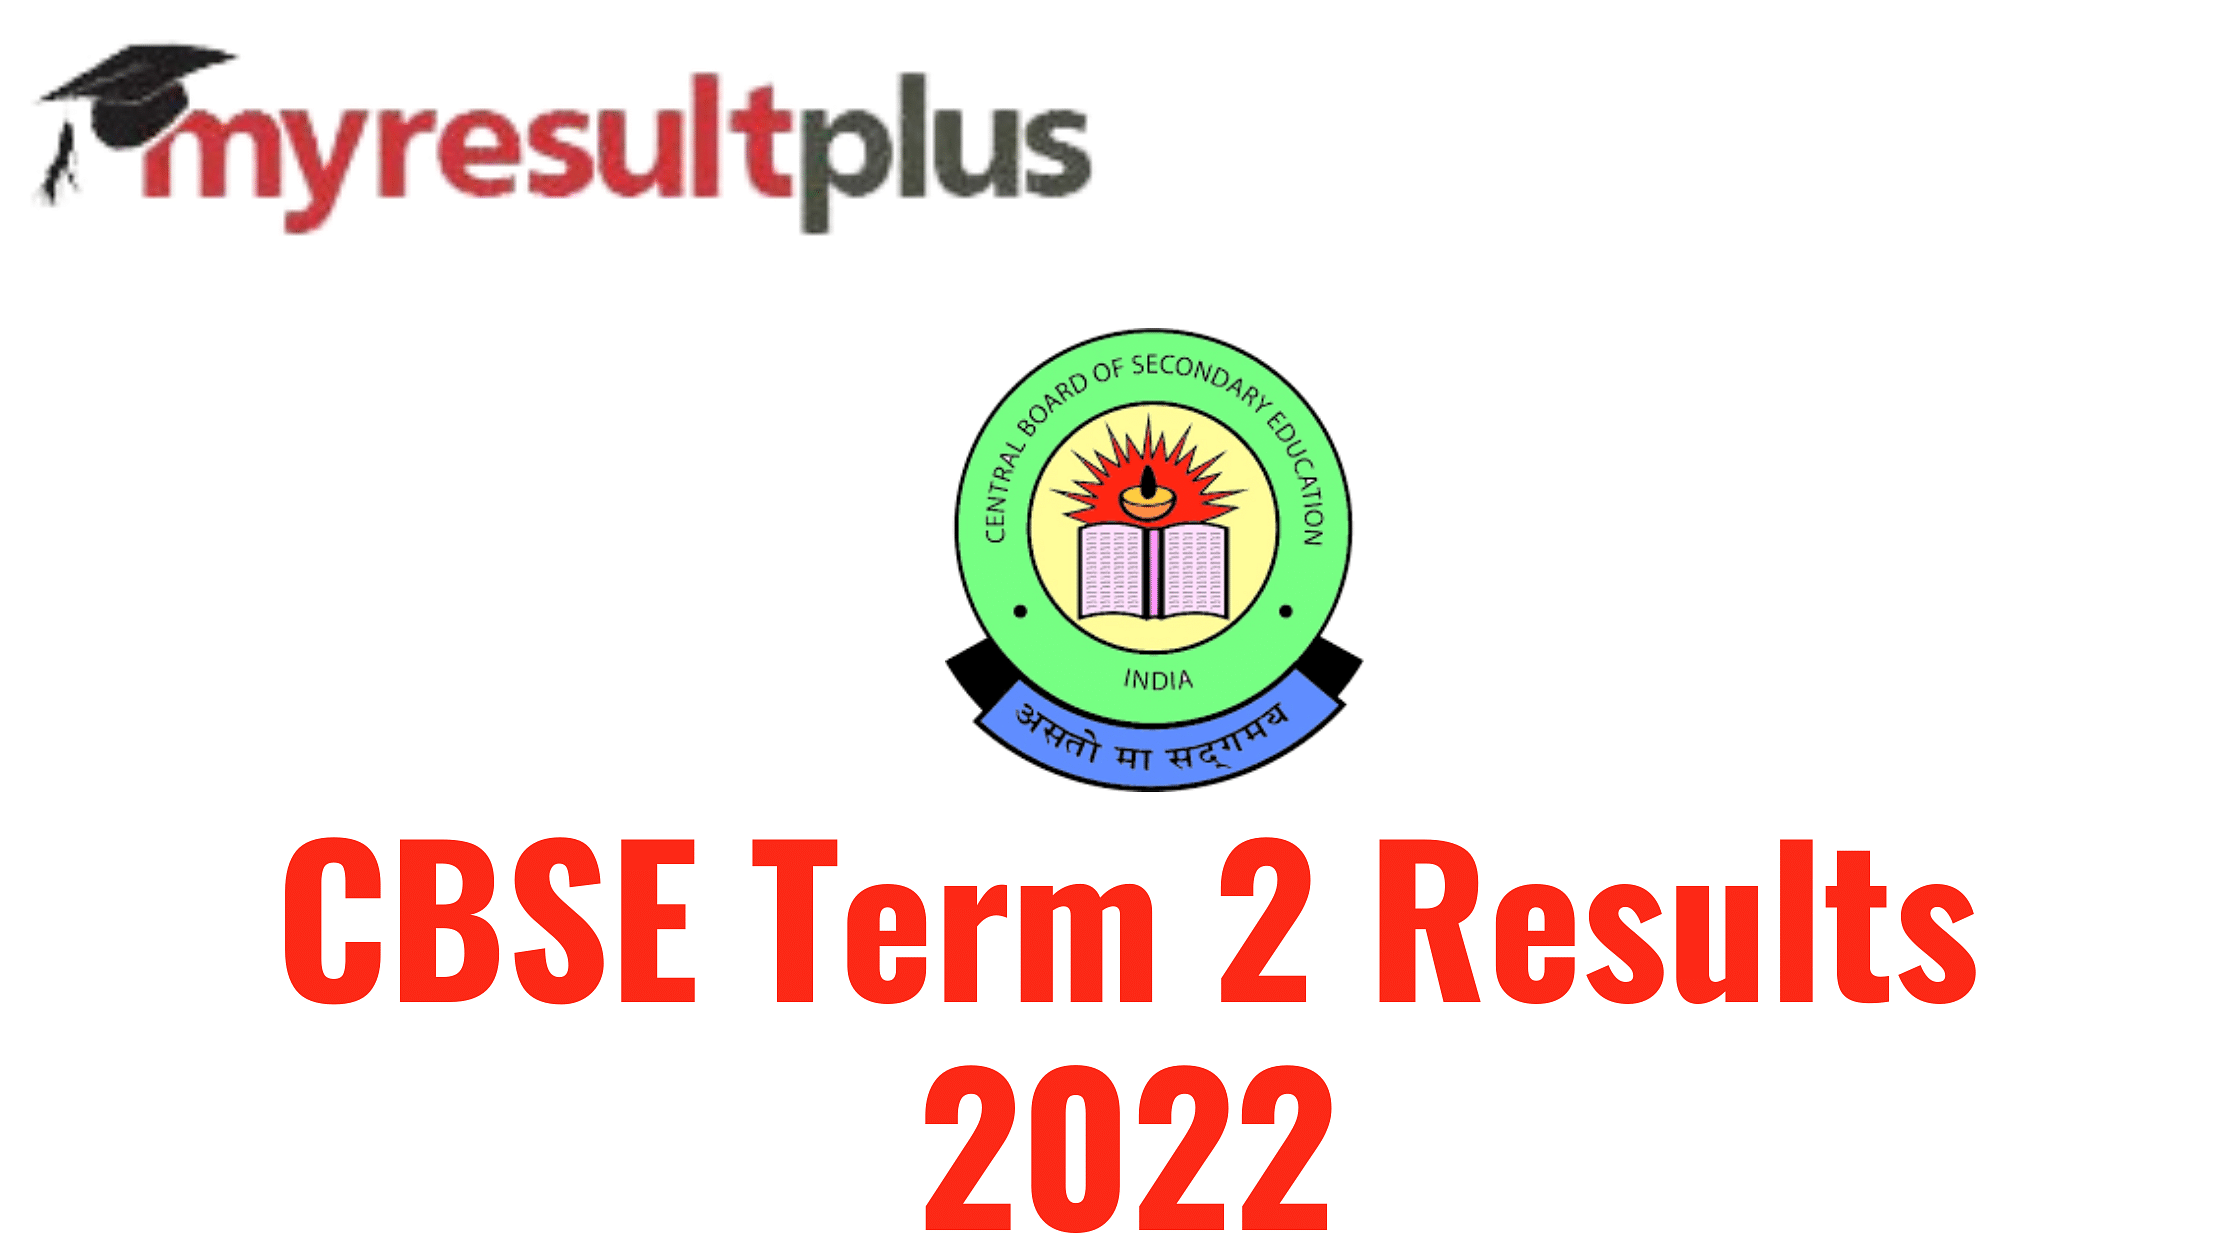 CBSE Term 2 Result 2022 Expected By This Date, Know How to Check Here